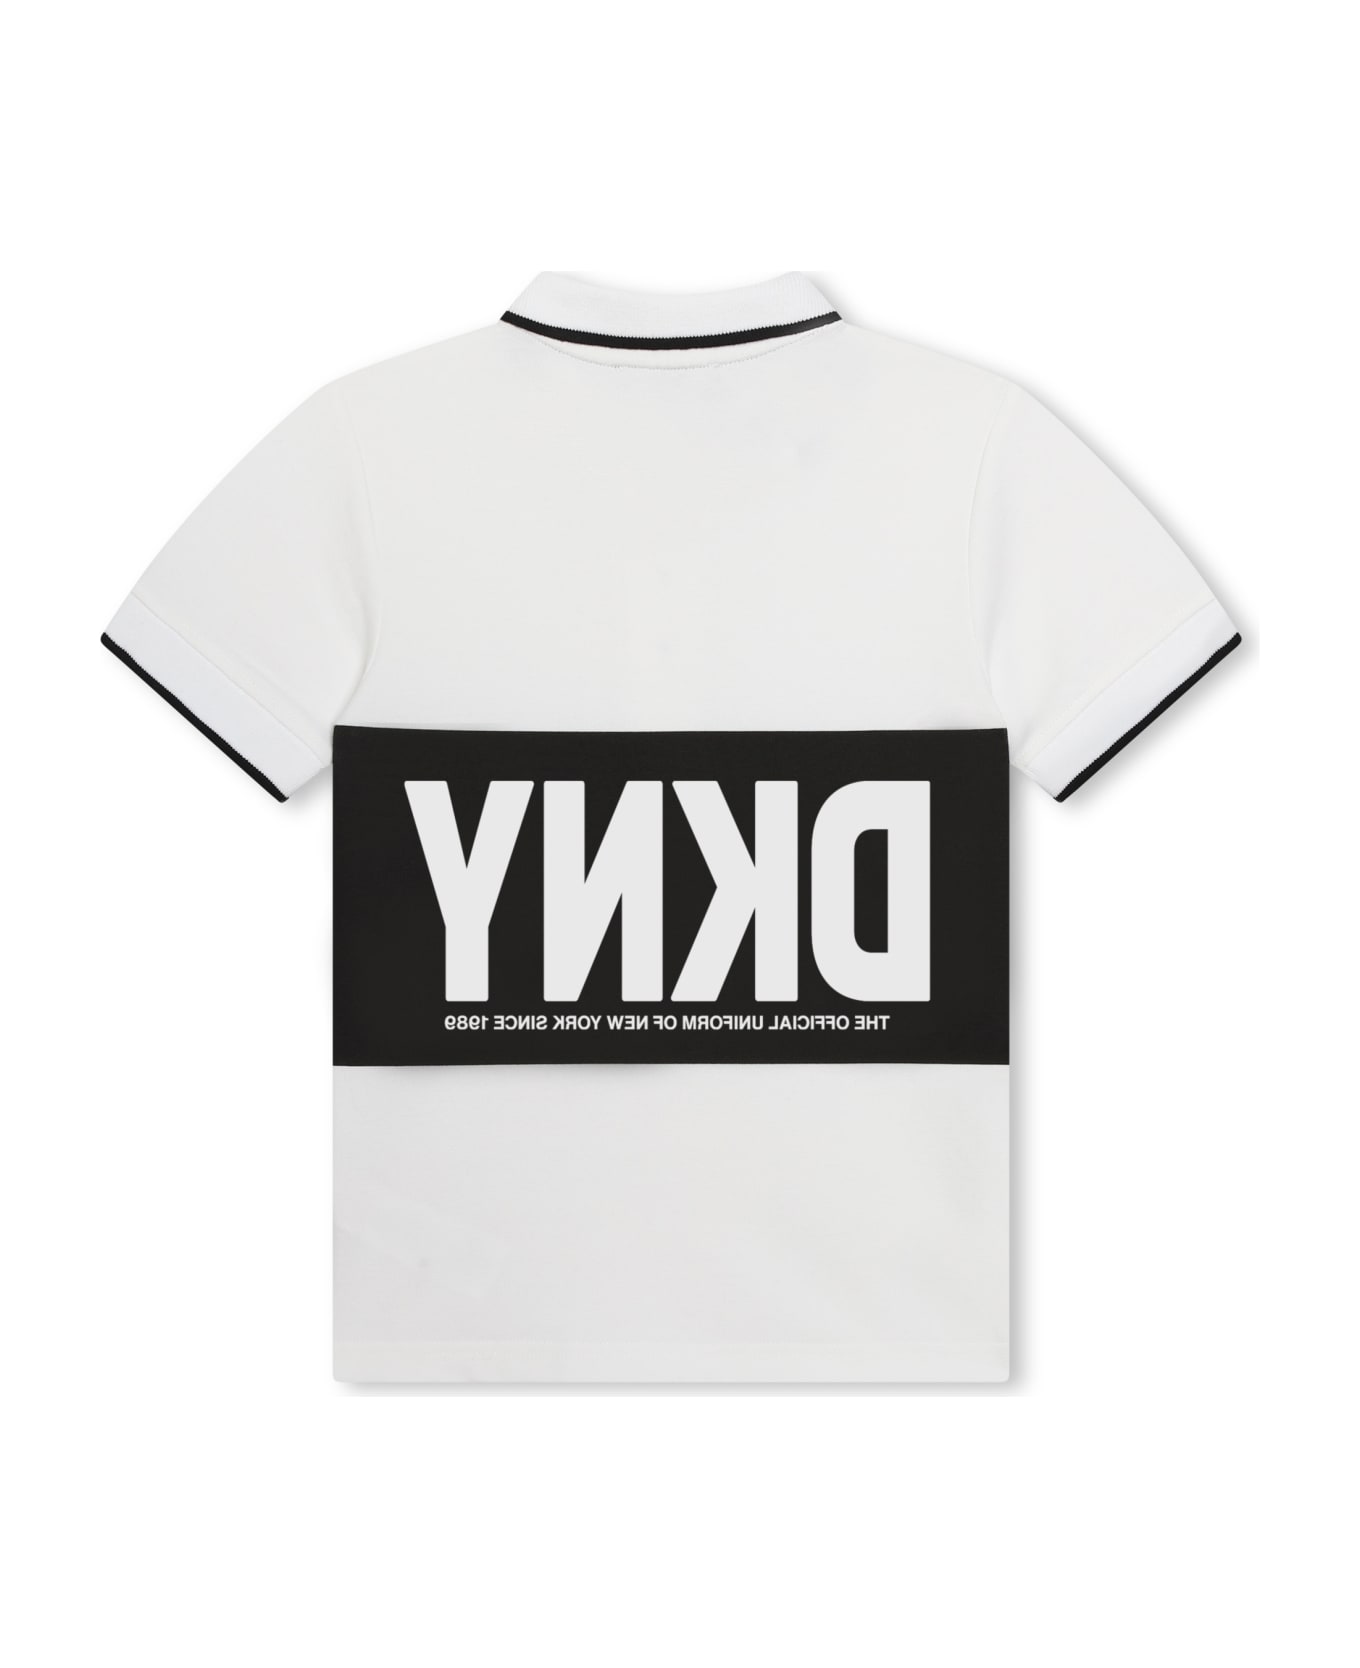 DKNY T-shirt With Logo - White アクセサリー＆ギフト